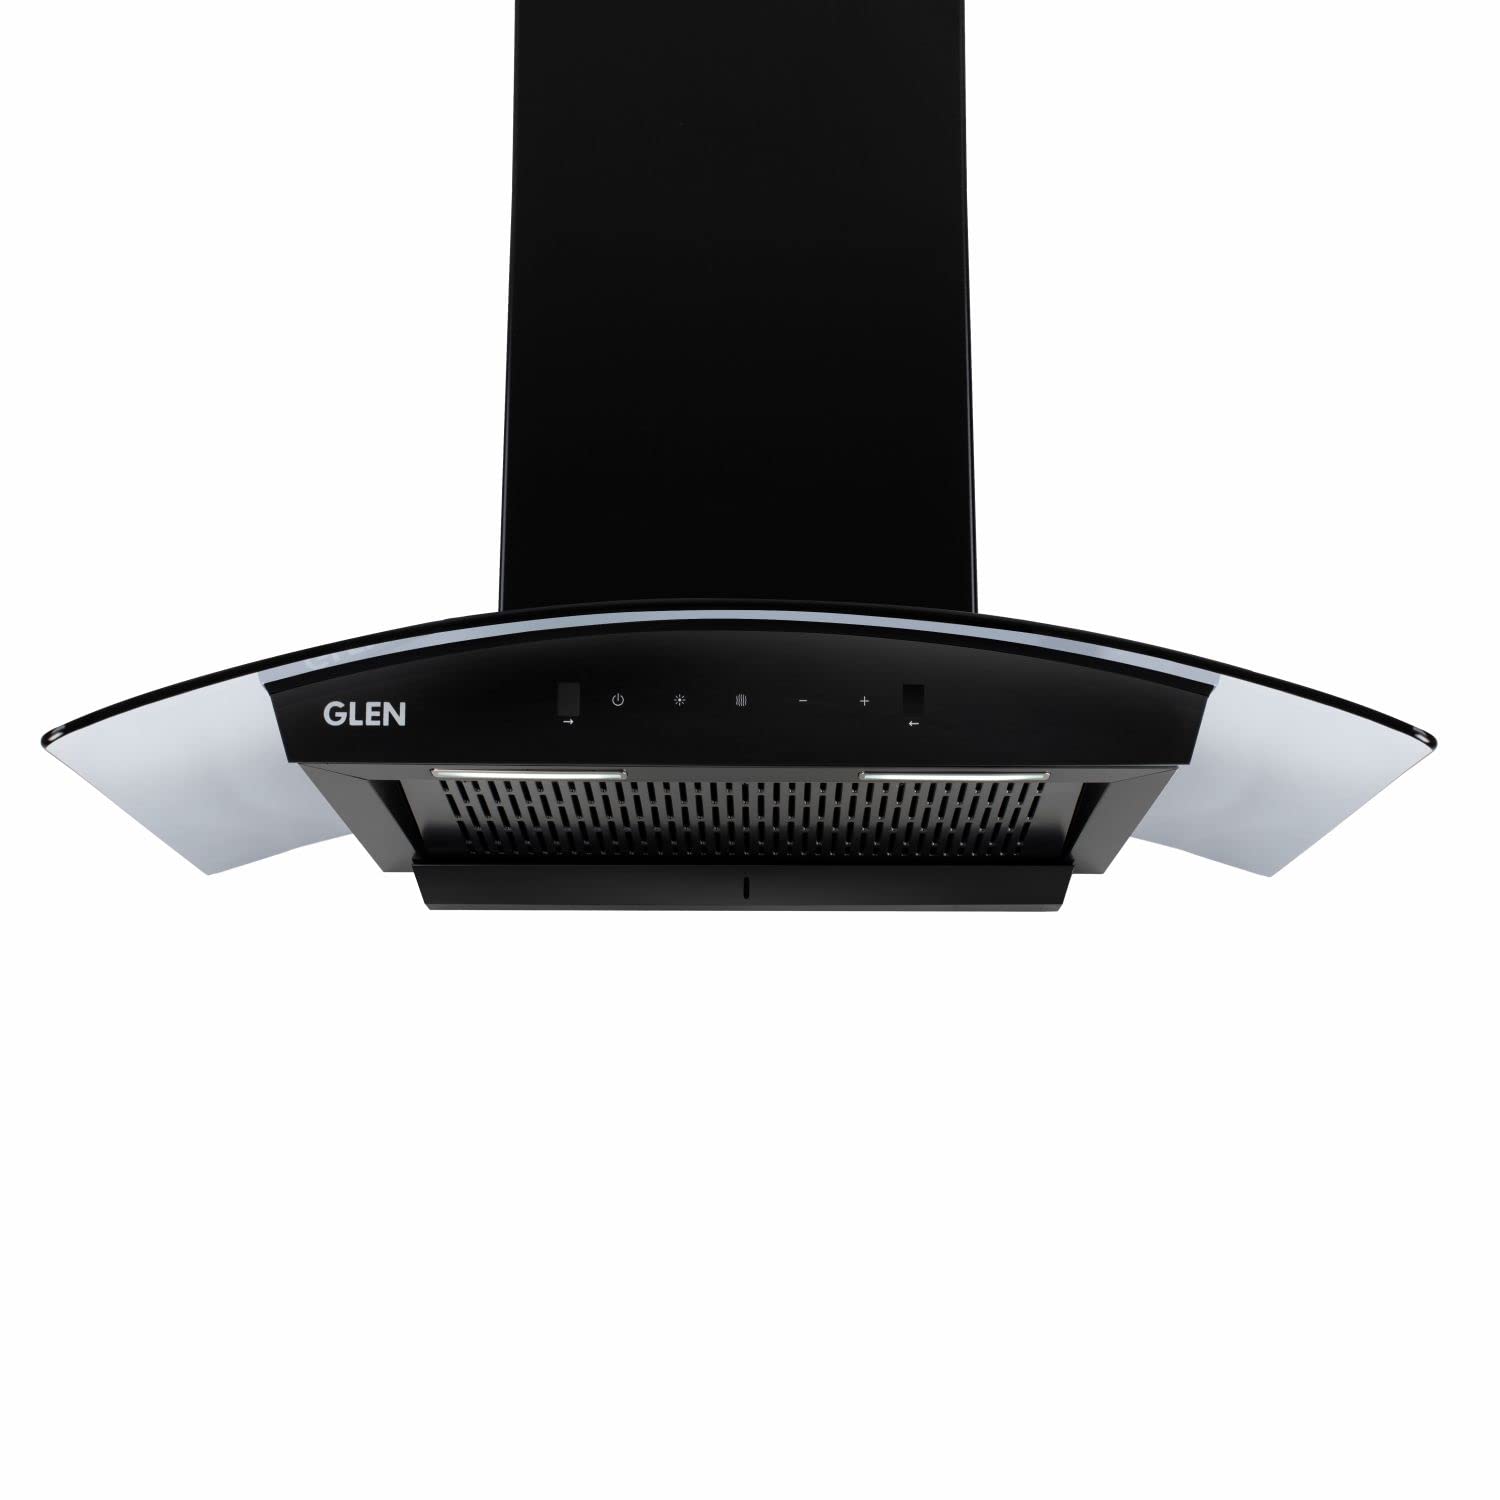 Glen Auto Clean Curved Glass Filter less Kitchen Chimney With 7 Year Warranty On Motor, with Motion Sensor 90cm, 1200 m3/h, Black (6058 BL Auto Clean)